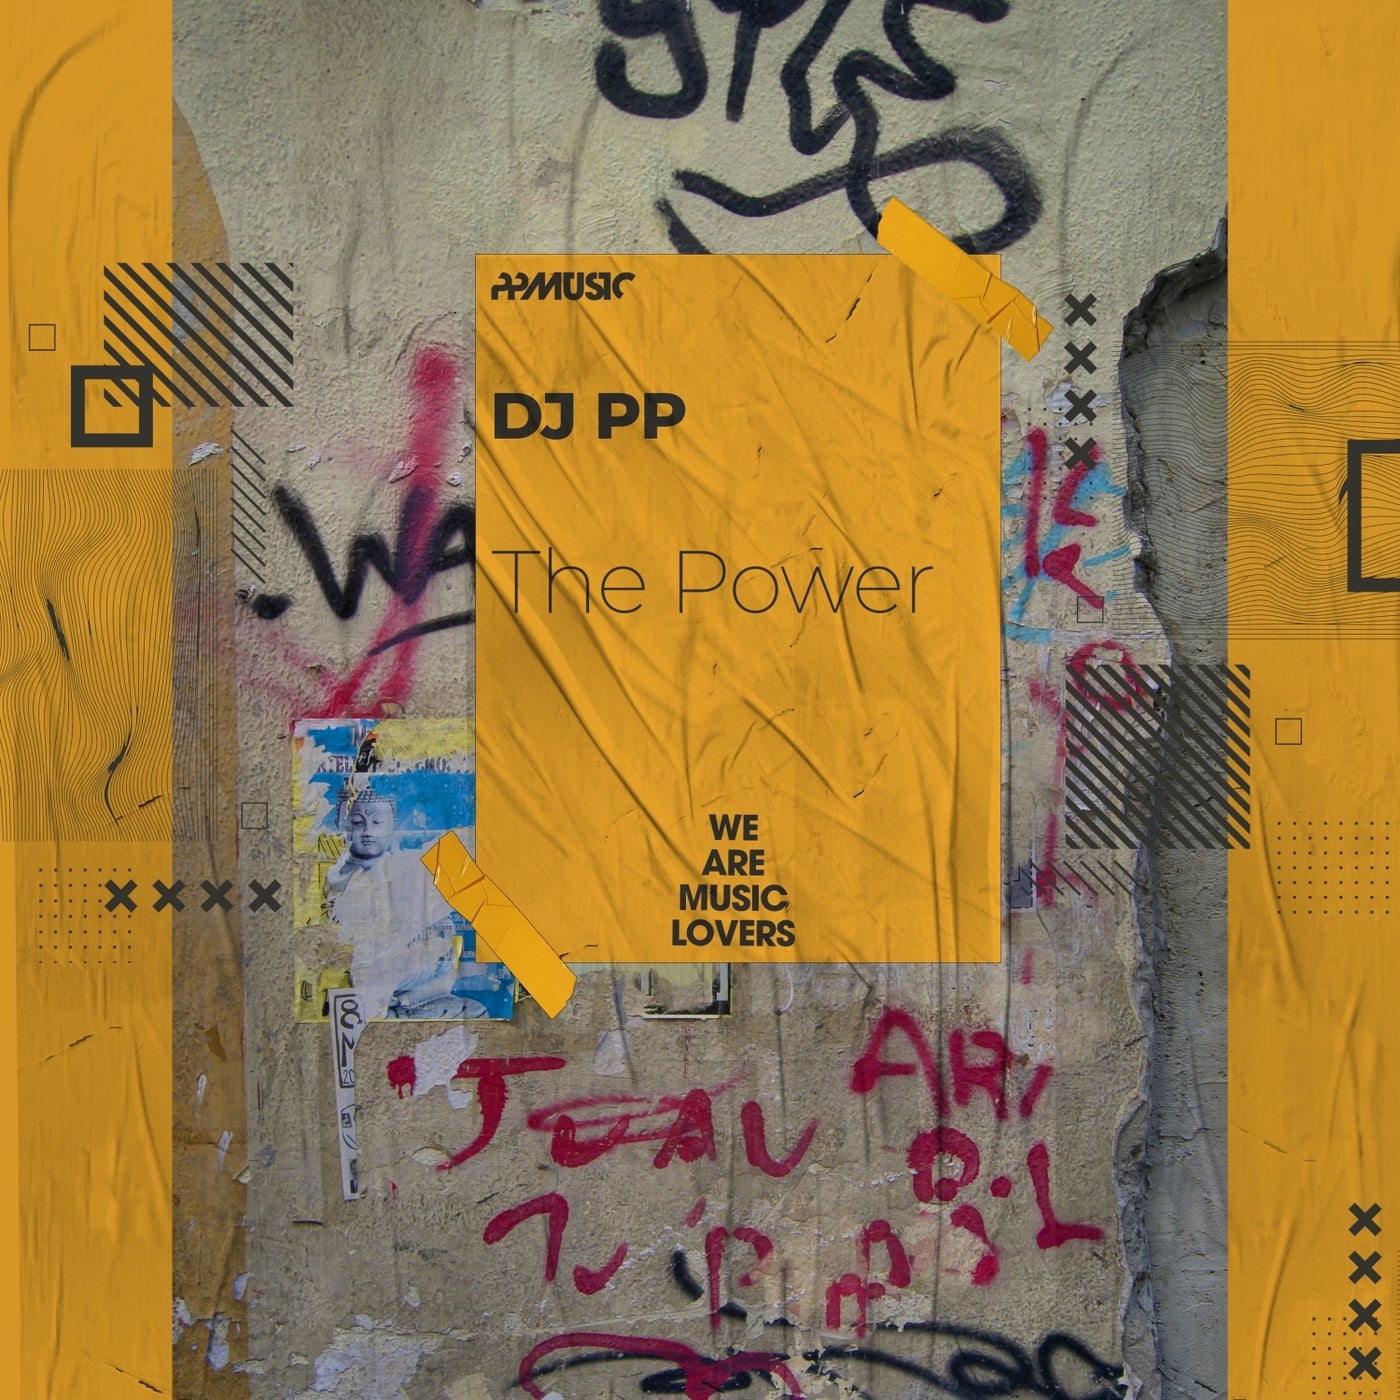 image cover: DJ PP - The Power (Original Mix) on PPMUSIC